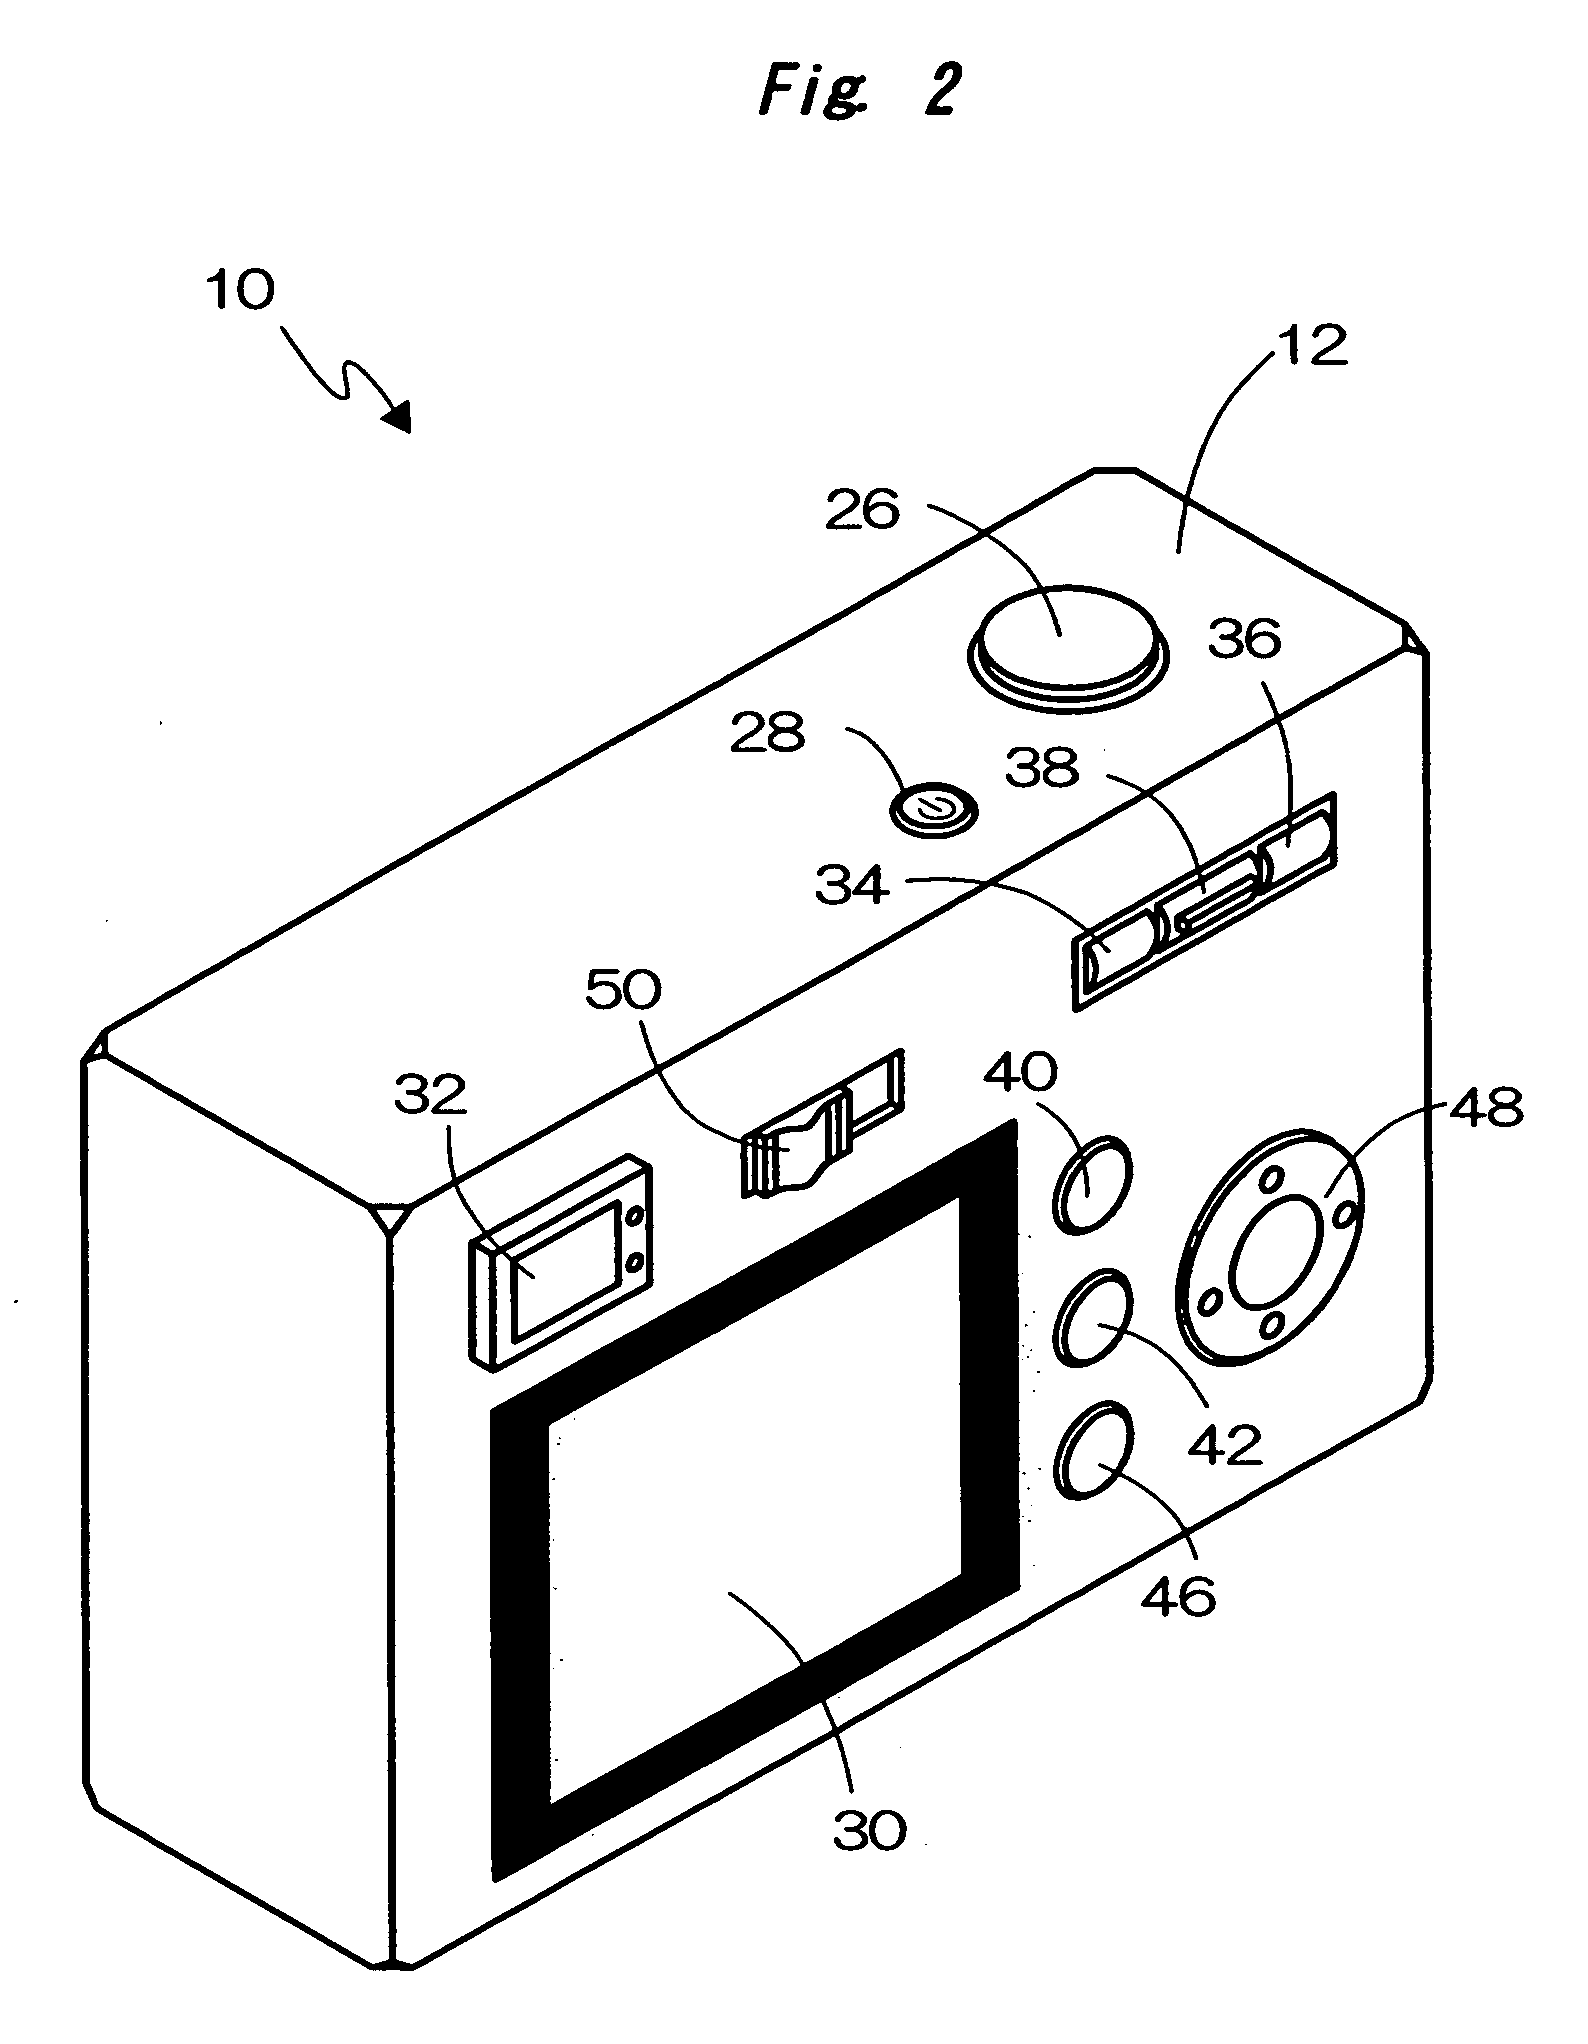 Photographing device